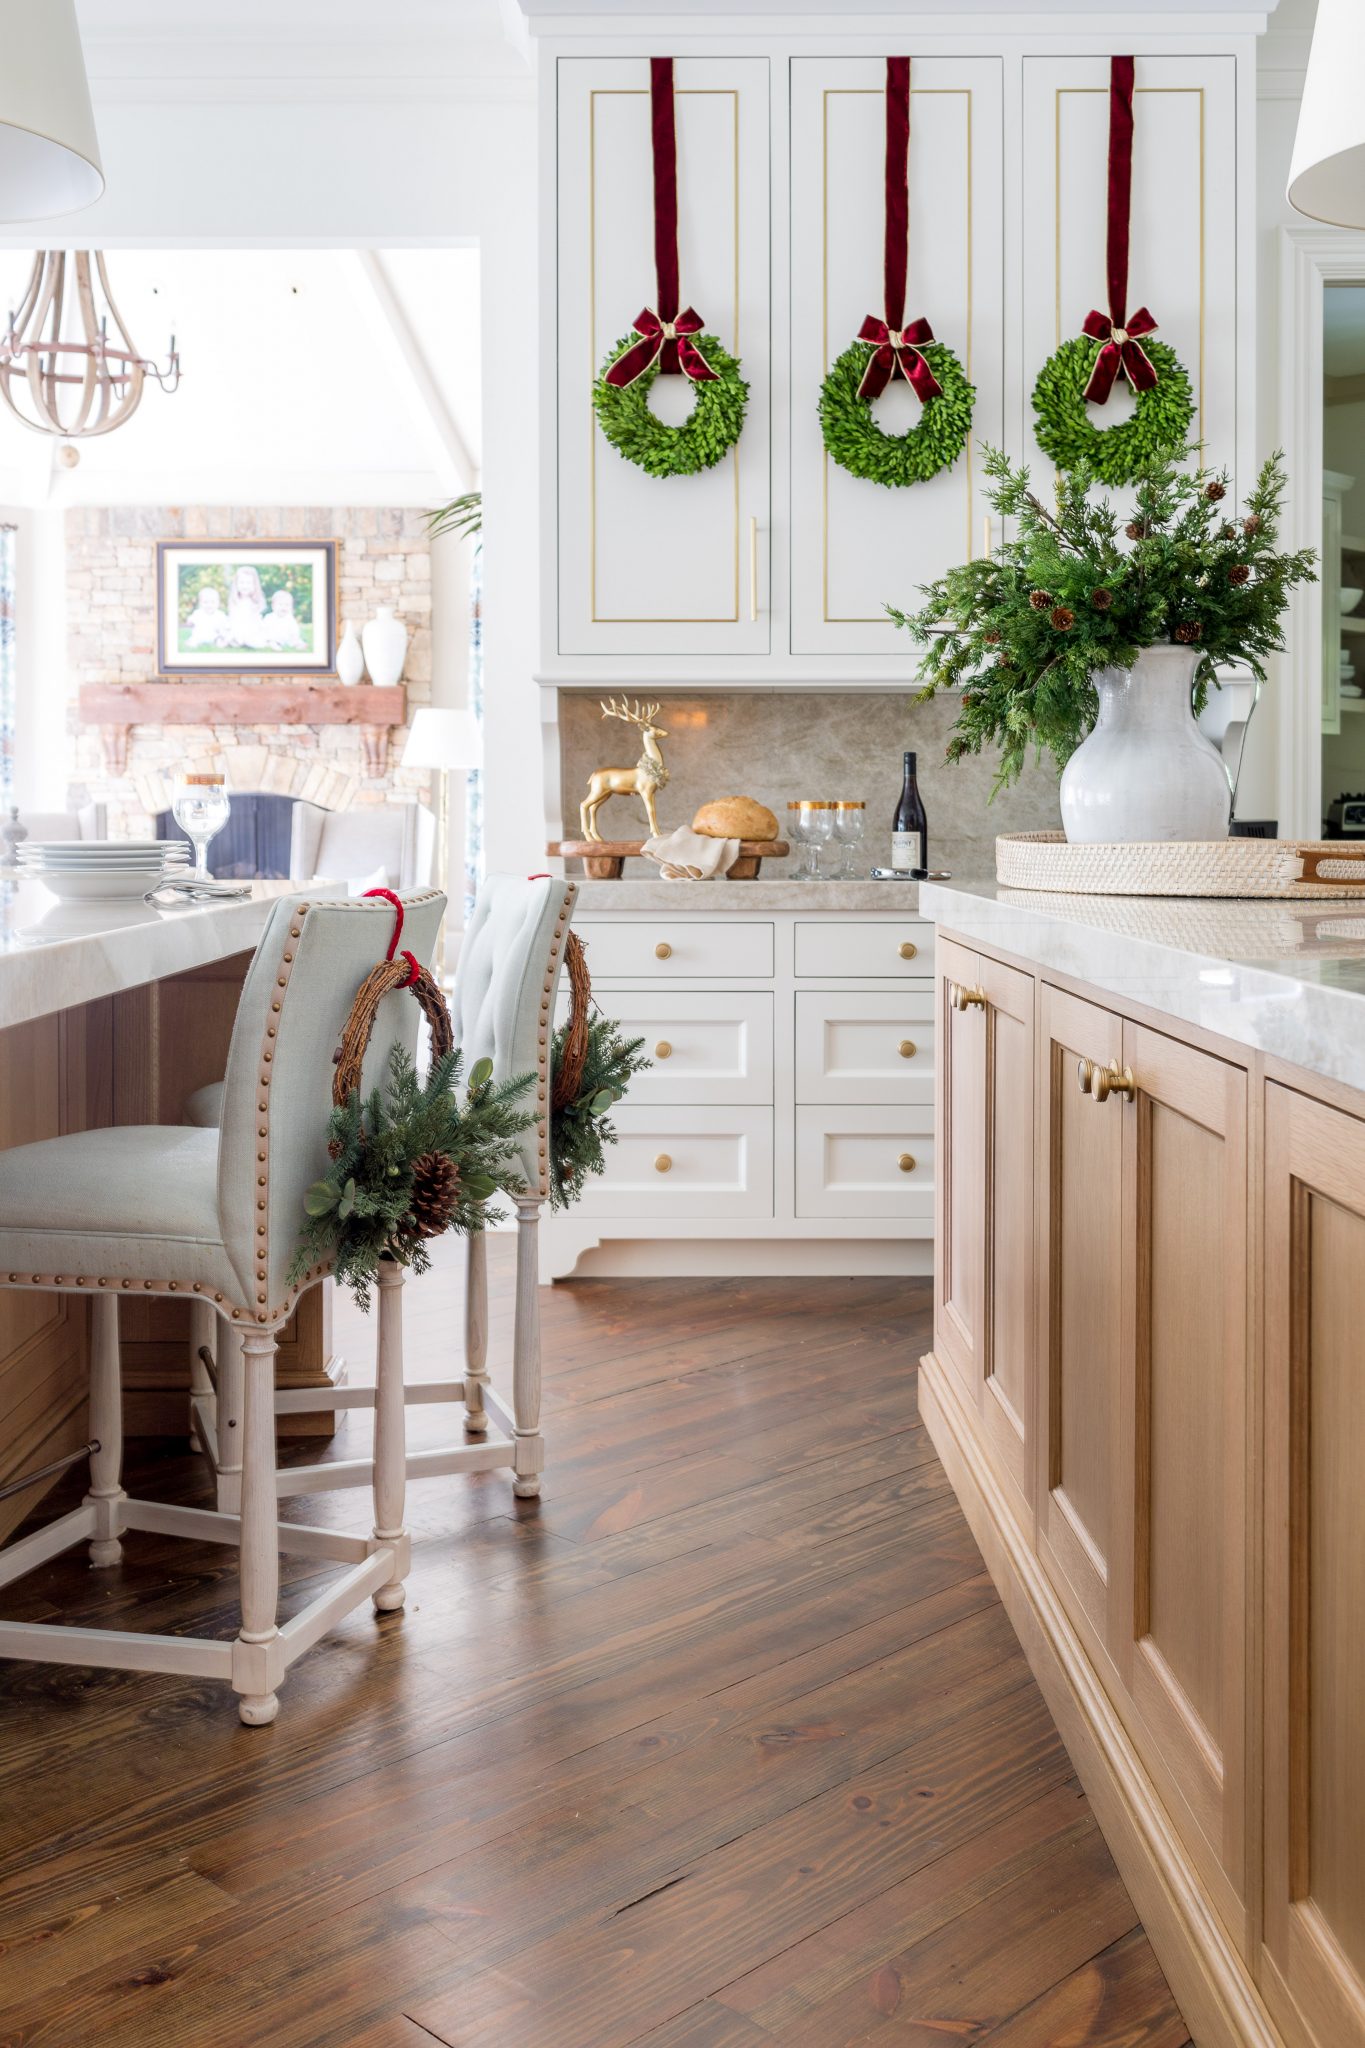 5 Top Picks for Wreaths on Kitchen Cabinets | BlueGrayGal